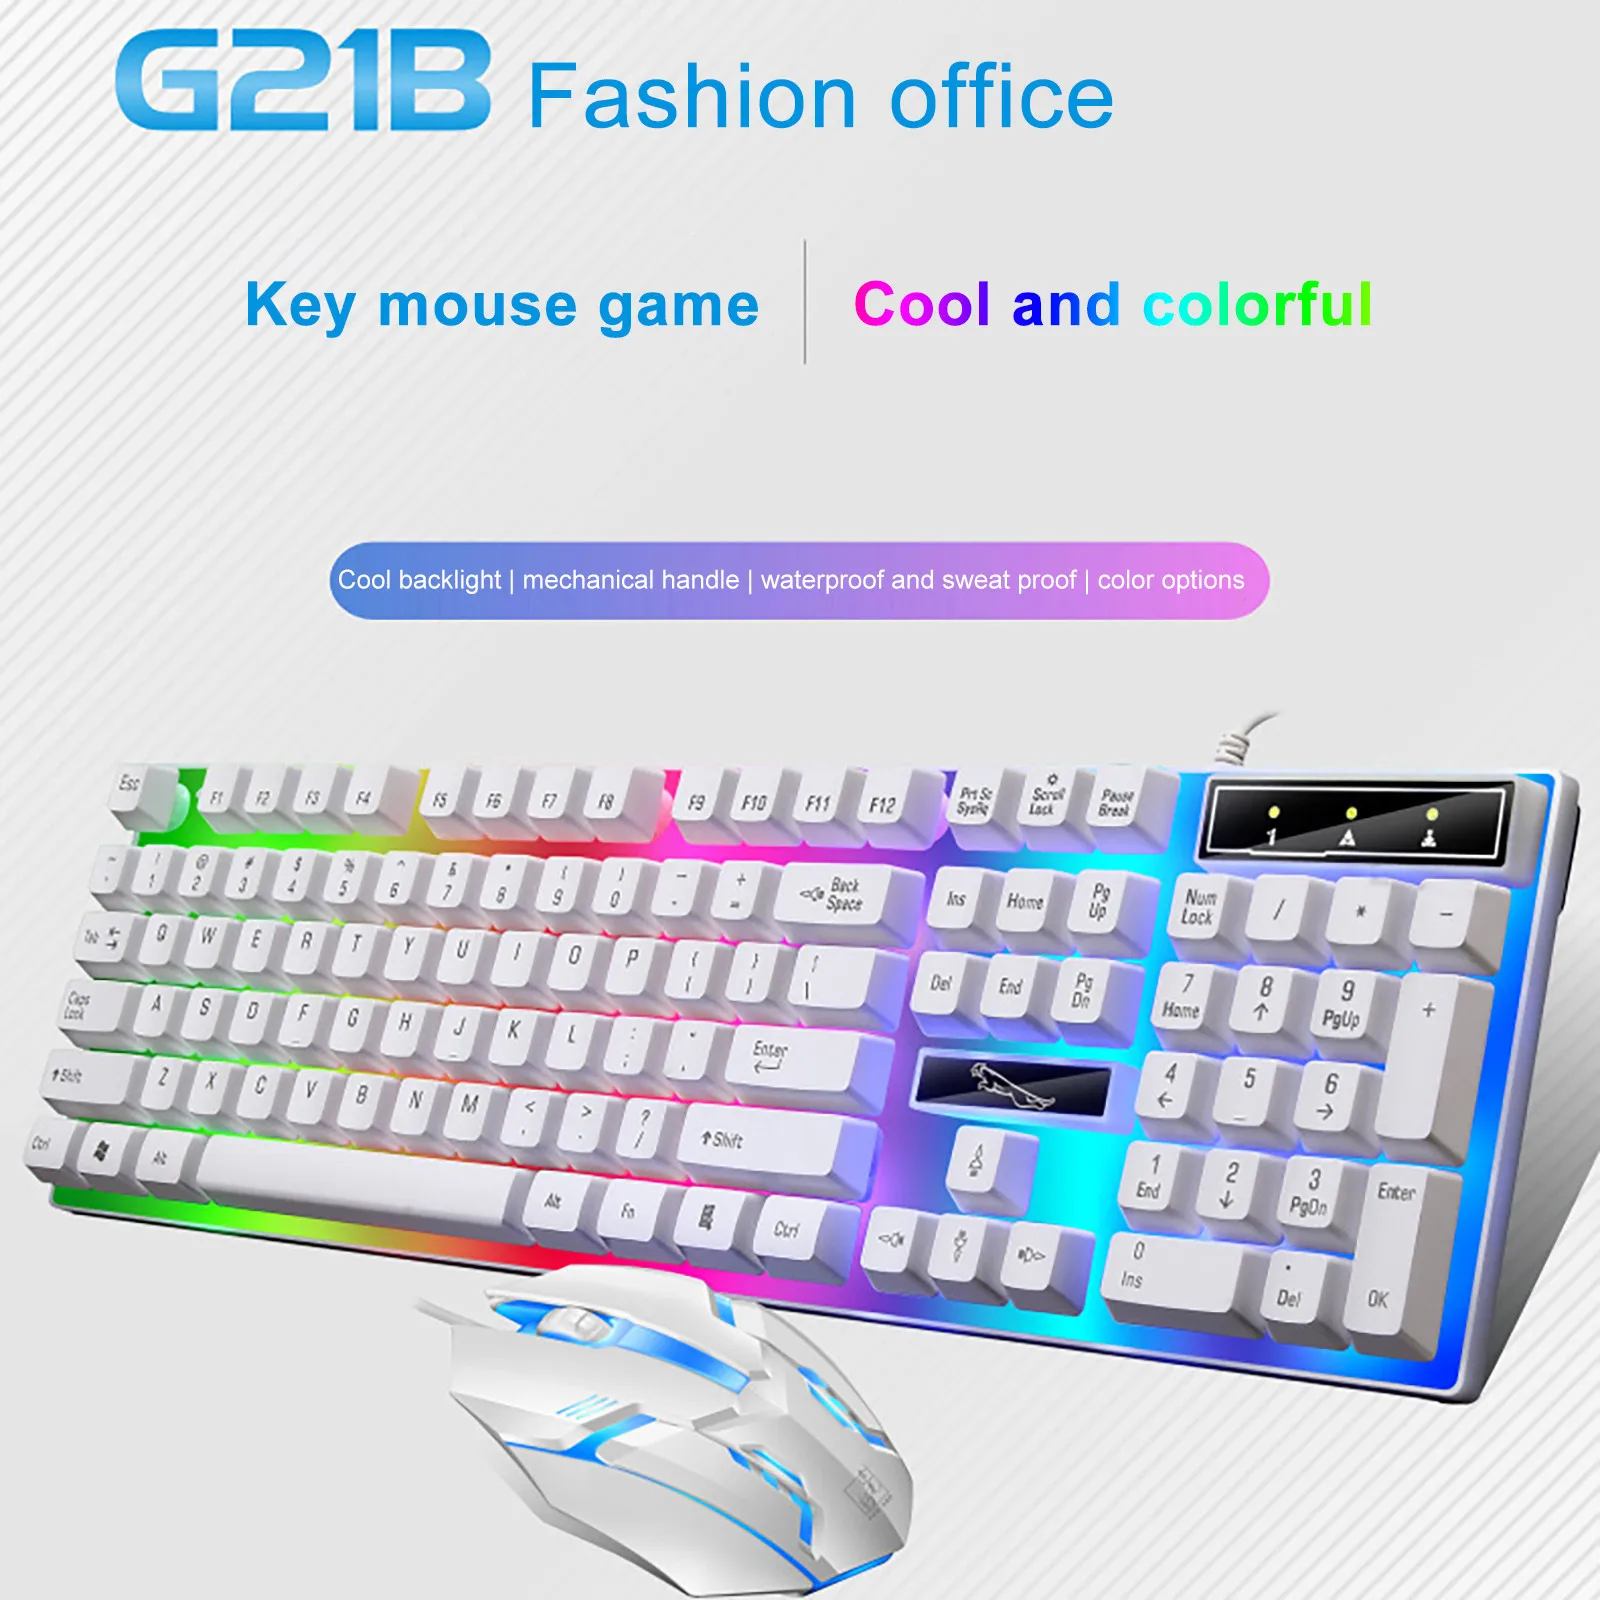 

Gaming Keyboard Computer Mouse Gamer Sets Rainbow Backlight USB Ergonomic Wired Keyboards 2400DPI Gaming Mouse For PC Laptop